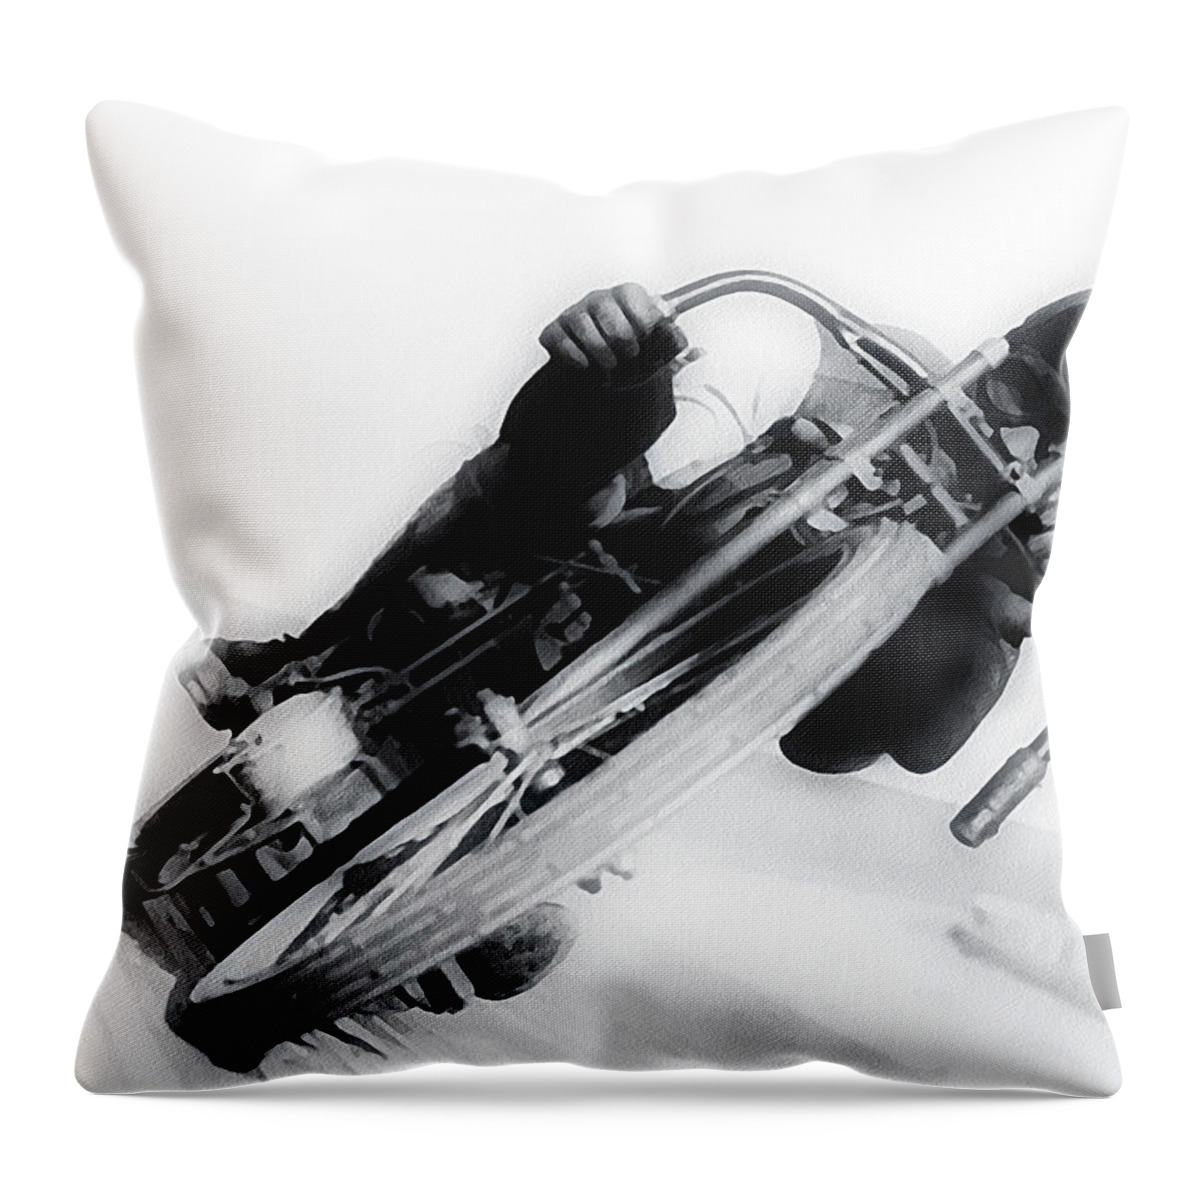 Leaning Hard Throw Pillow featuring the photograph Leaning Hard by Digital Reproductions